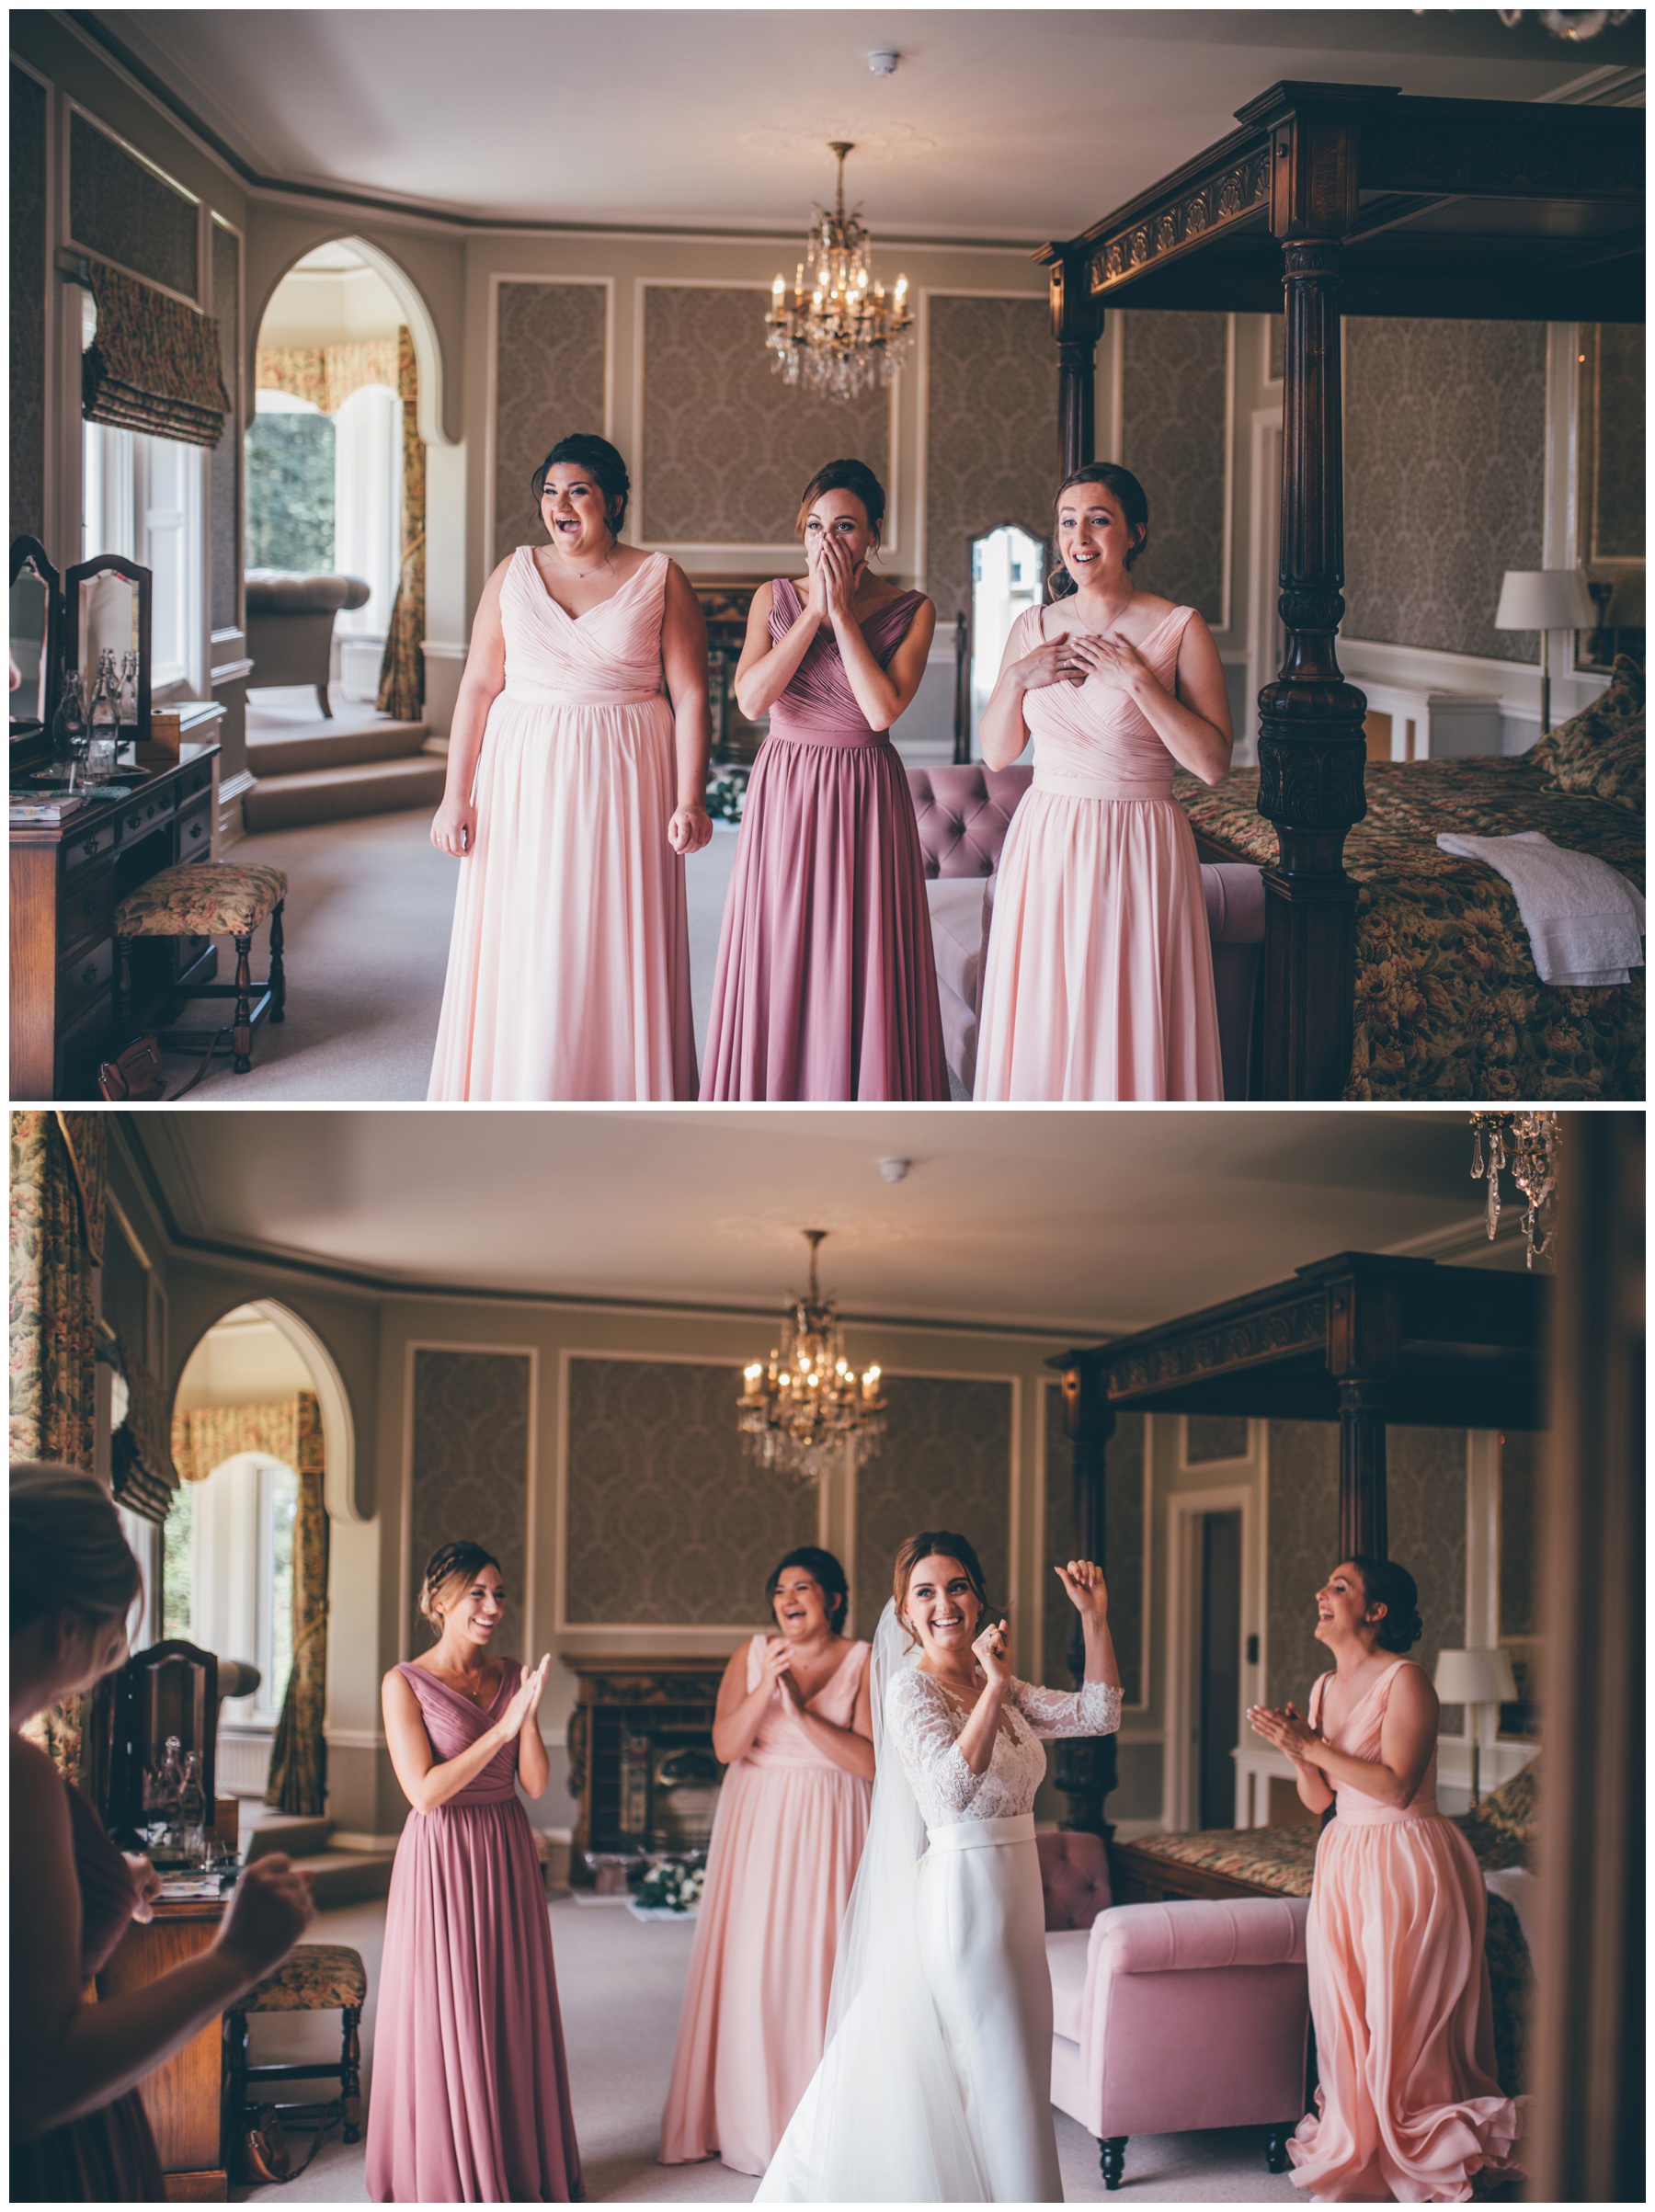 The bridesmaids see their friend for the first time as a bride at Tilstone House.